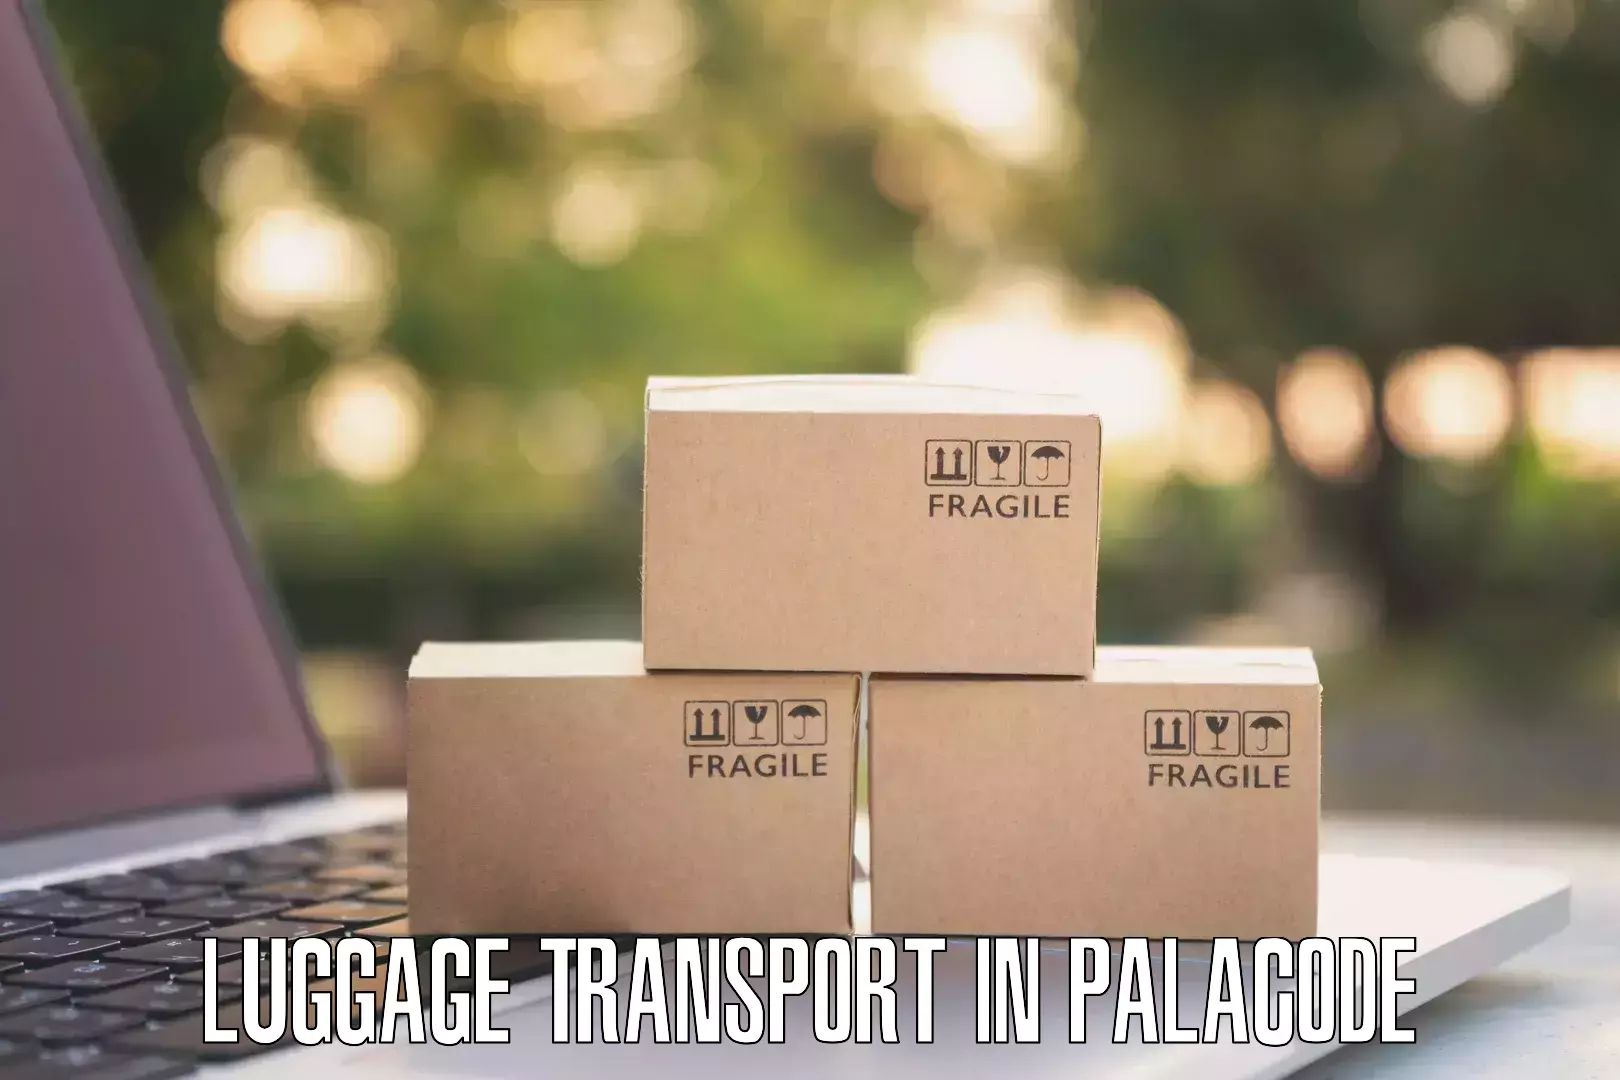 Discounted baggage transport in Palacode